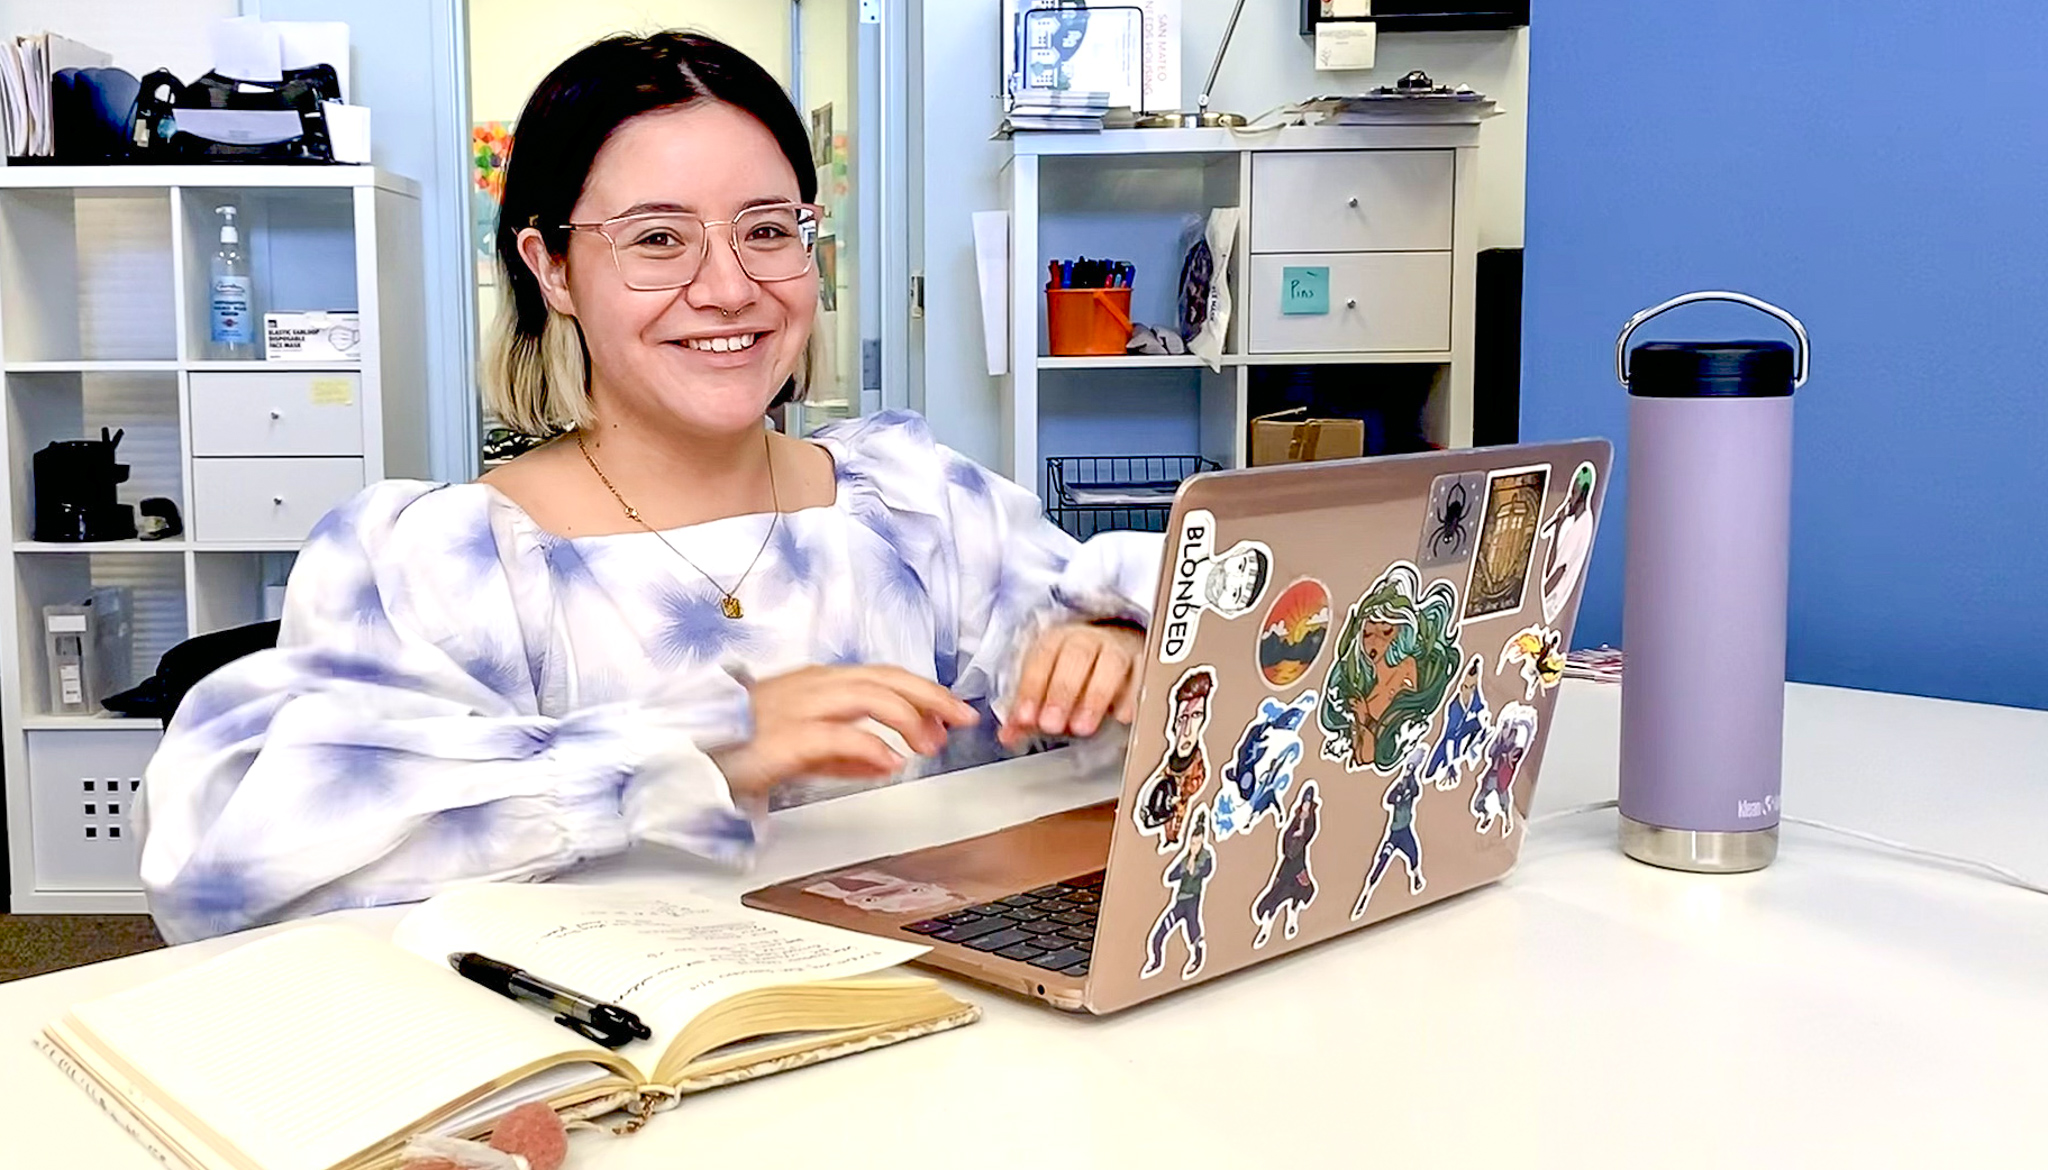 A woman with glasses wears a poofy, purple and white blouse and sits at a table with a laptop covered in stickers.